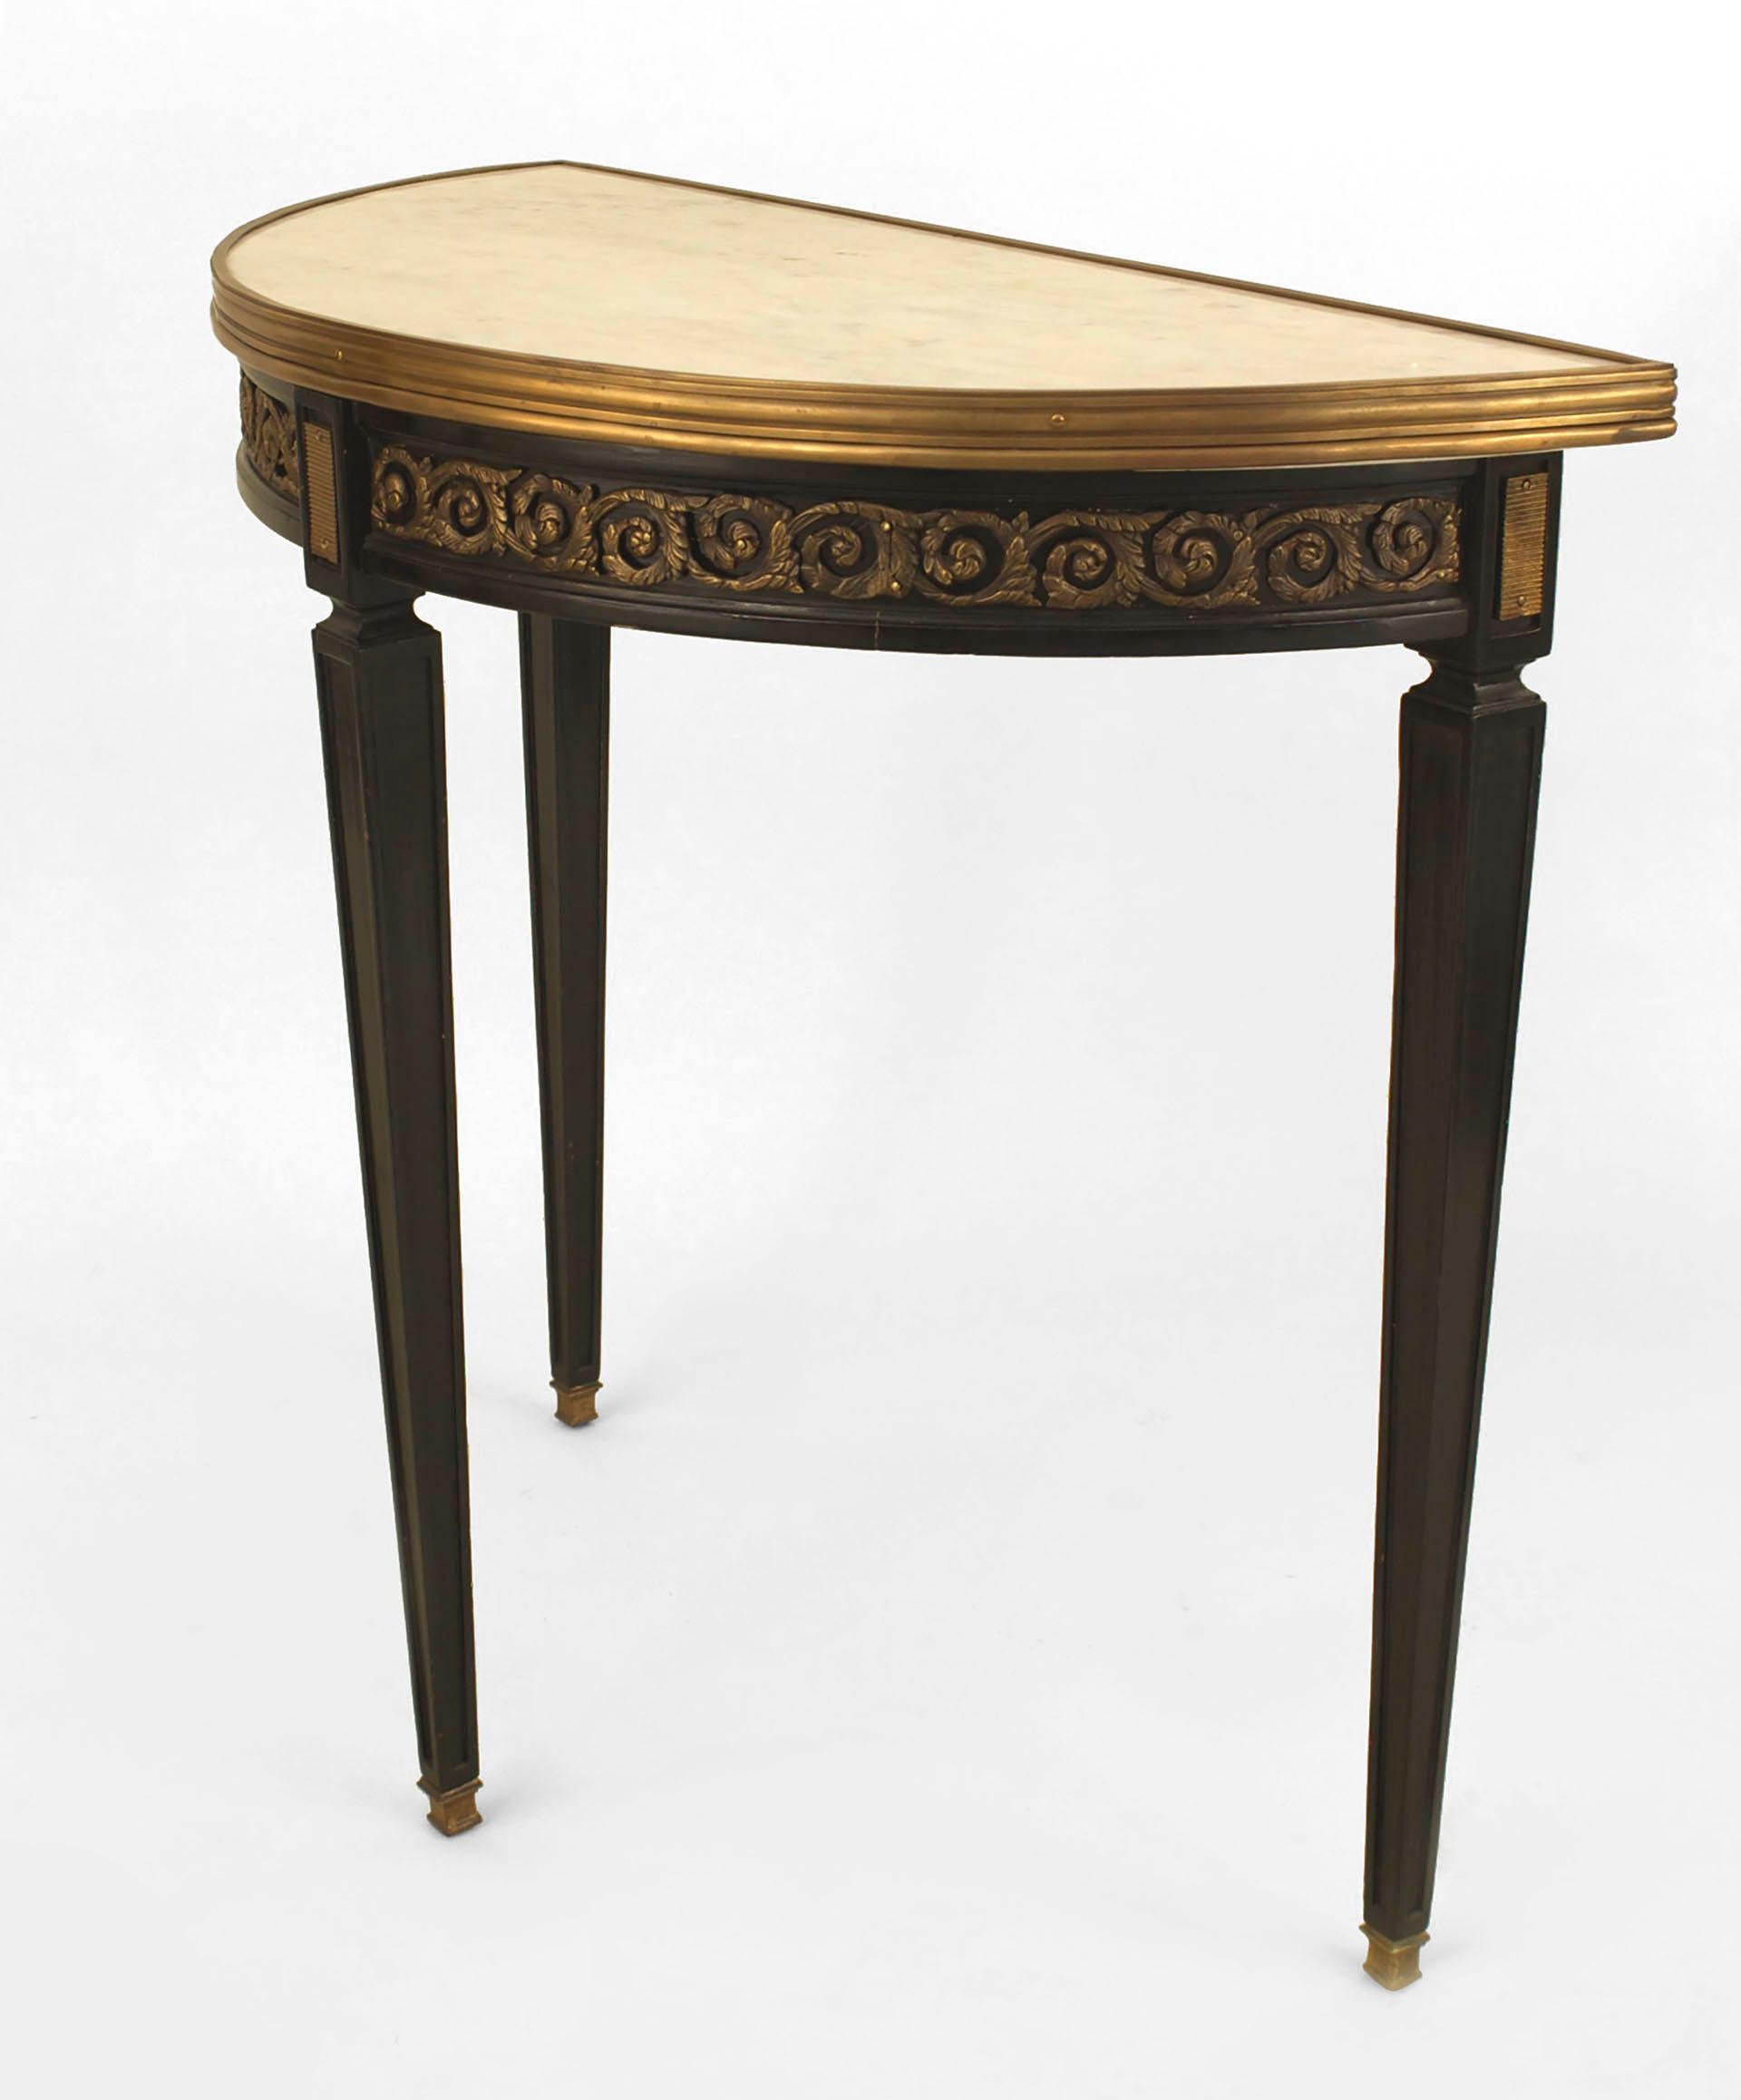 French Louis XVI-style (1940s) ebonized demilune shaped console table with a bronze trimmed scroll design apron and top edge with an inset white marble top. (stamped: JANSEN)
